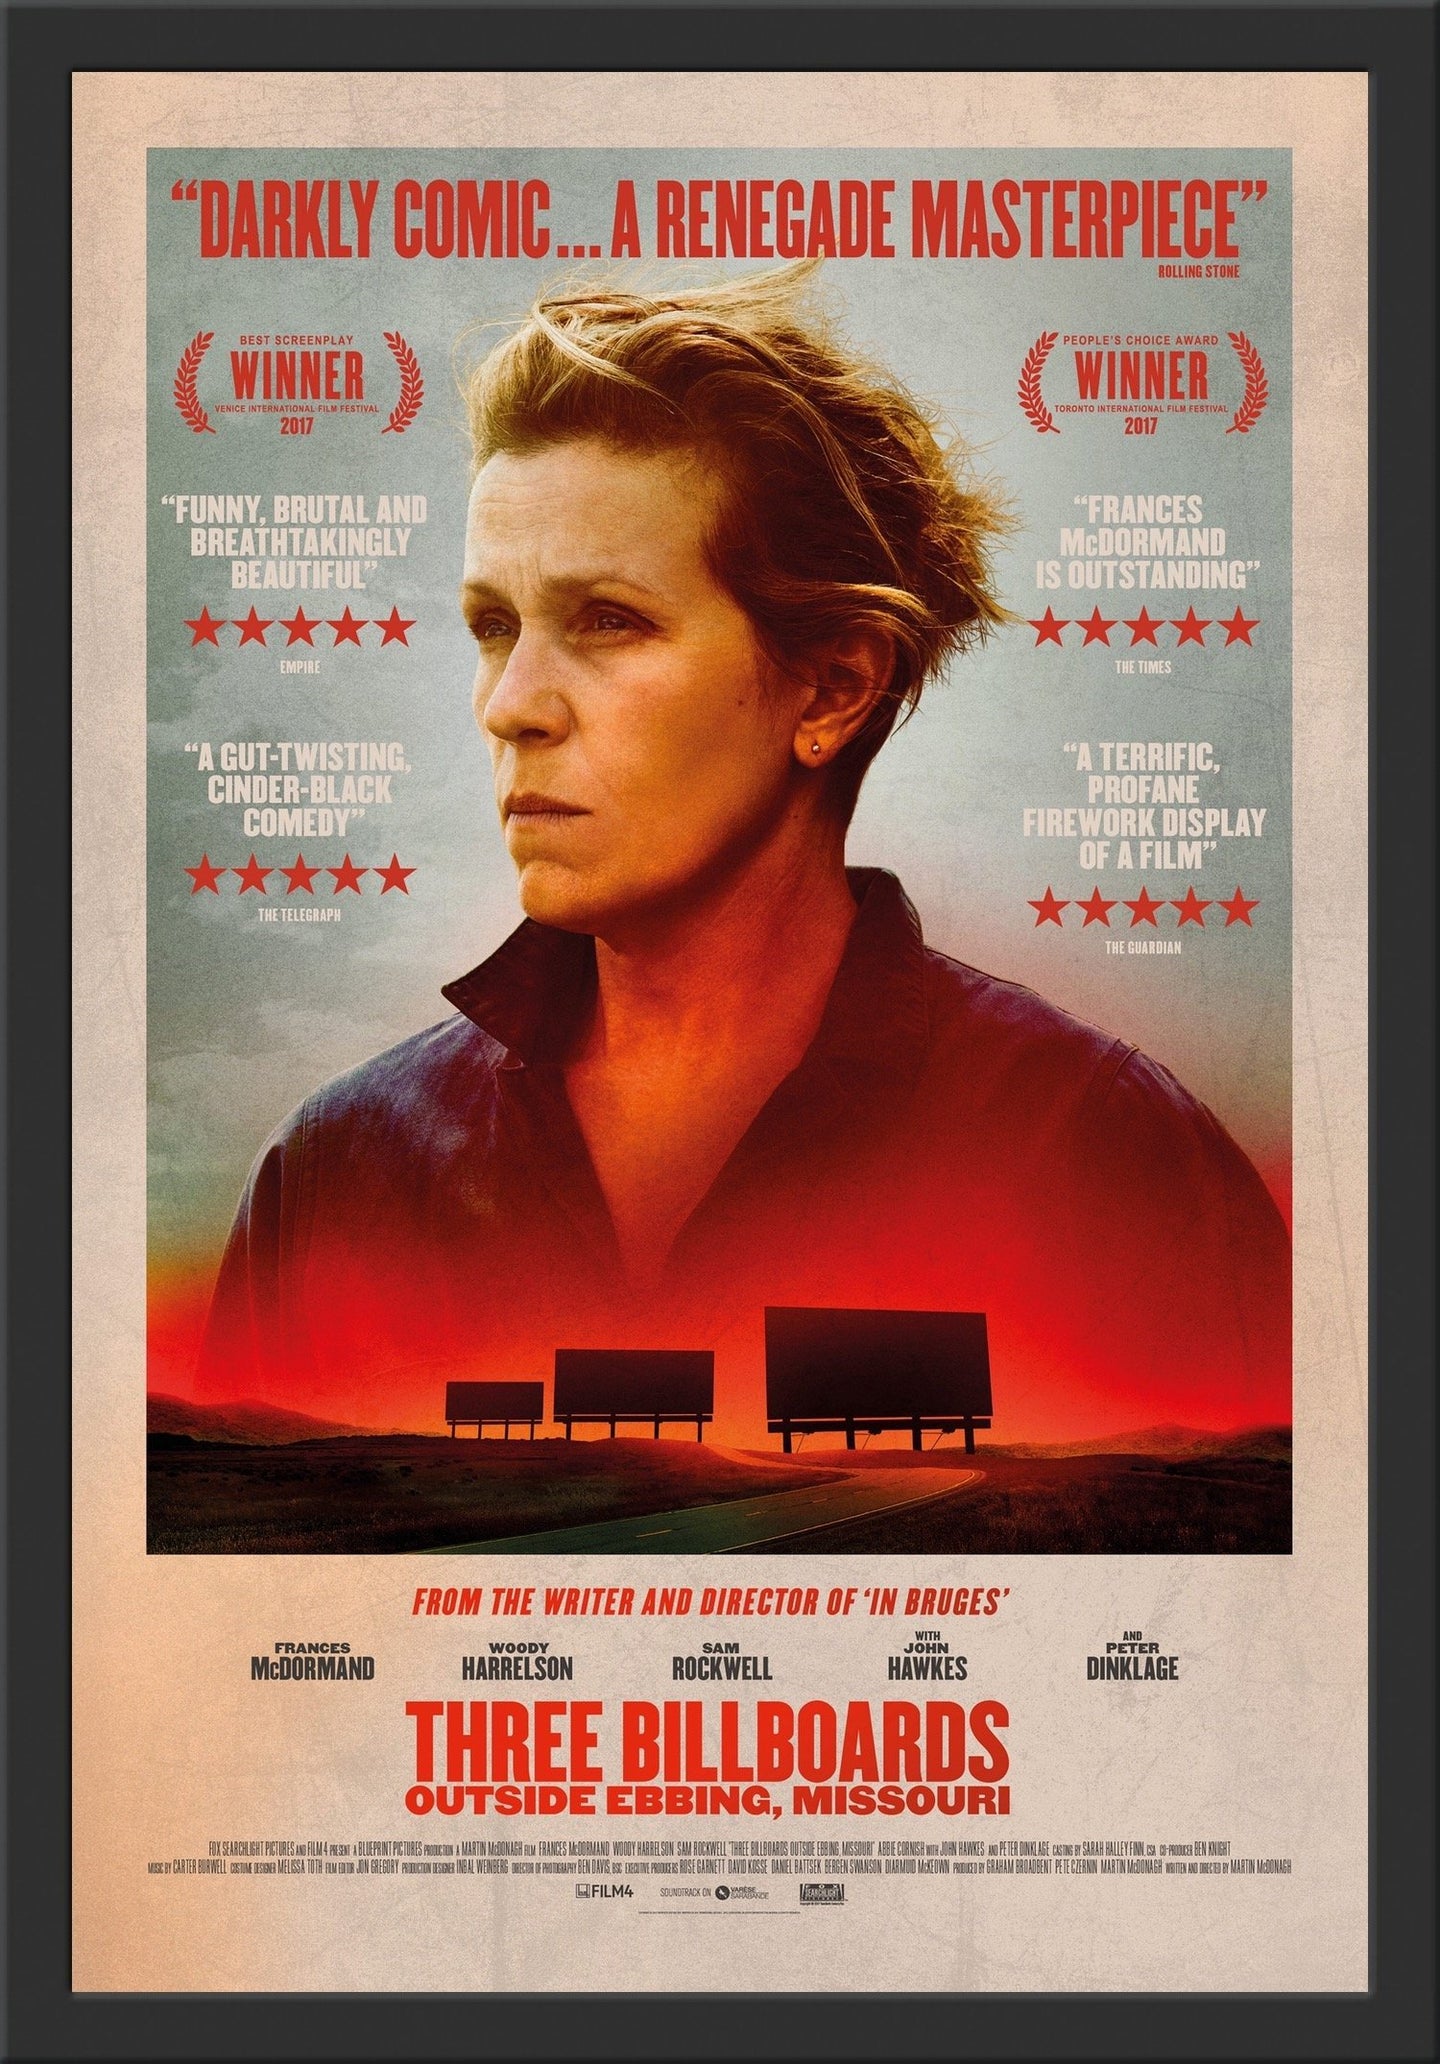 An original movie poster for the film Three Billboards Outside Ebbing, Missouri